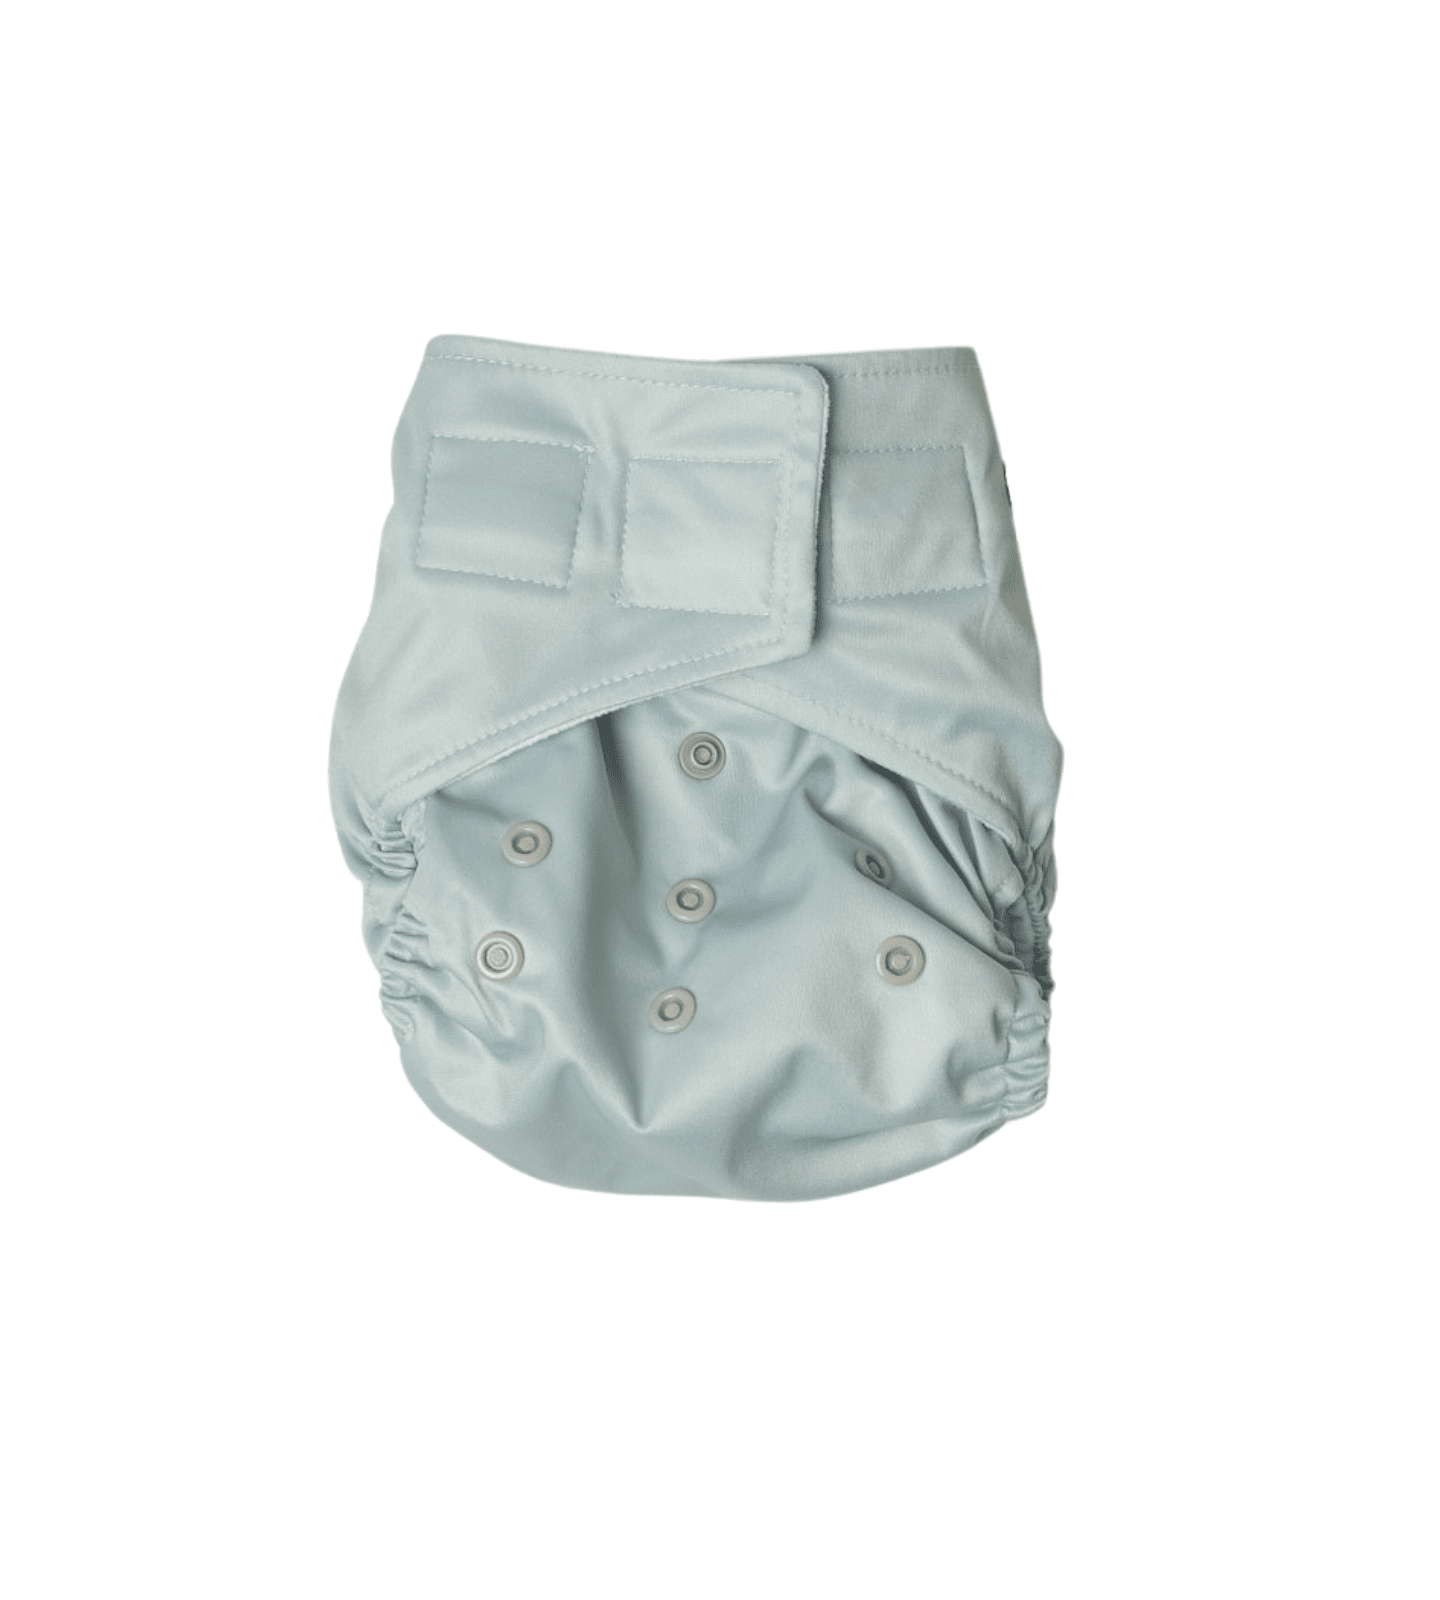 Snazzi Pants All in One Cloth Nappy - Brolly Sheets AU